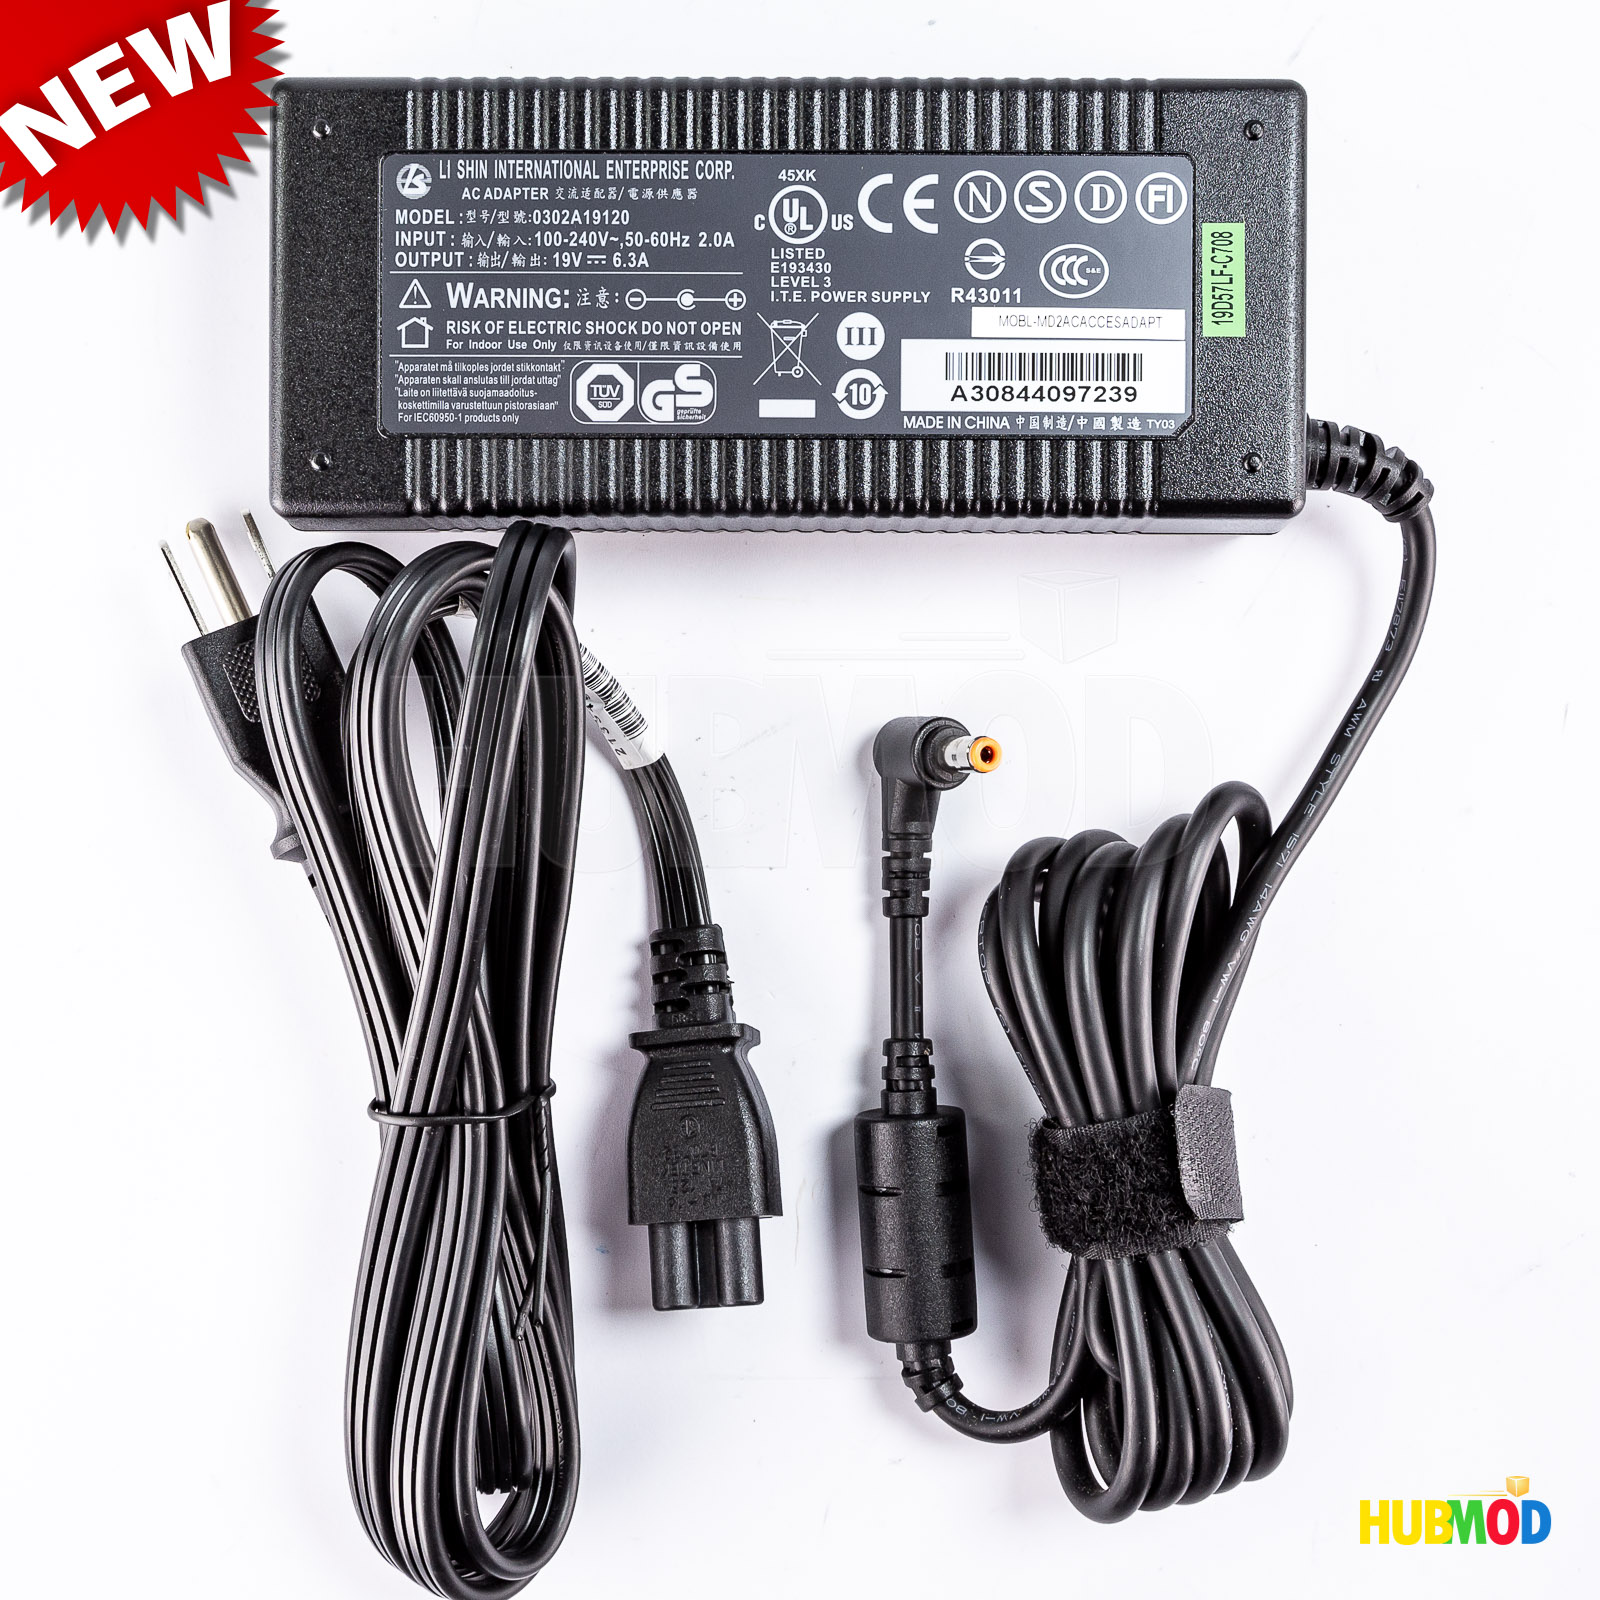 NEW Original ALIENWARE AREA-51 M15X-R1 M15XR1 19V 6.3A AC Power Charger Adapter Brand: LI SHIN Max. Output Power: 12